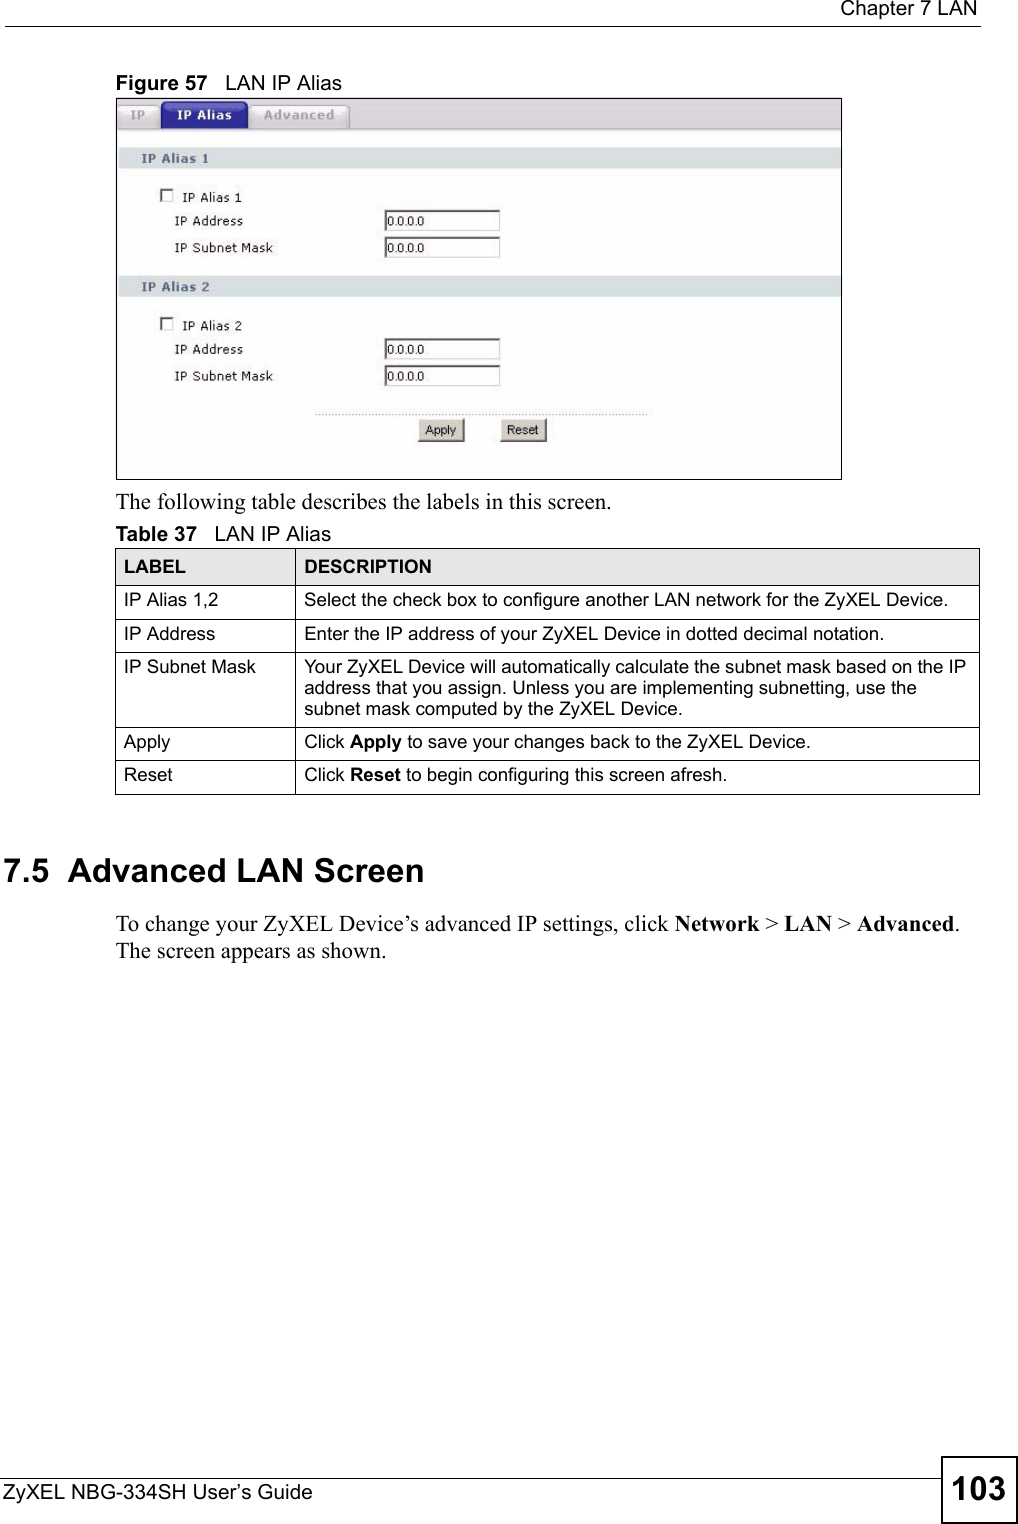  Chapter 7 LANZyXEL NBG-334SH User’s Guide 103Figure 57   LAN IP AliasThe following table describes the labels in this screen.7.5  Advanced LAN ScreenTo change your ZyXEL Device’s advanced IP settings, click Network &gt; LAN &gt; Advanced. The screen appears as shown.Table 37   LAN IP AliasLABEL DESCRIPTIONIP Alias 1,2 Select the check box to configure another LAN network for the ZyXEL Device.IP Address Enter the IP address of your ZyXEL Device in dotted decimal notation. IP Subnet Mask Your ZyXEL Device will automatically calculate the subnet mask based on the IP address that you assign. Unless you are implementing subnetting, use the subnet mask computed by the ZyXEL Device.Apply Click Apply to save your changes back to the ZyXEL Device.Reset Click Reset to begin configuring this screen afresh.